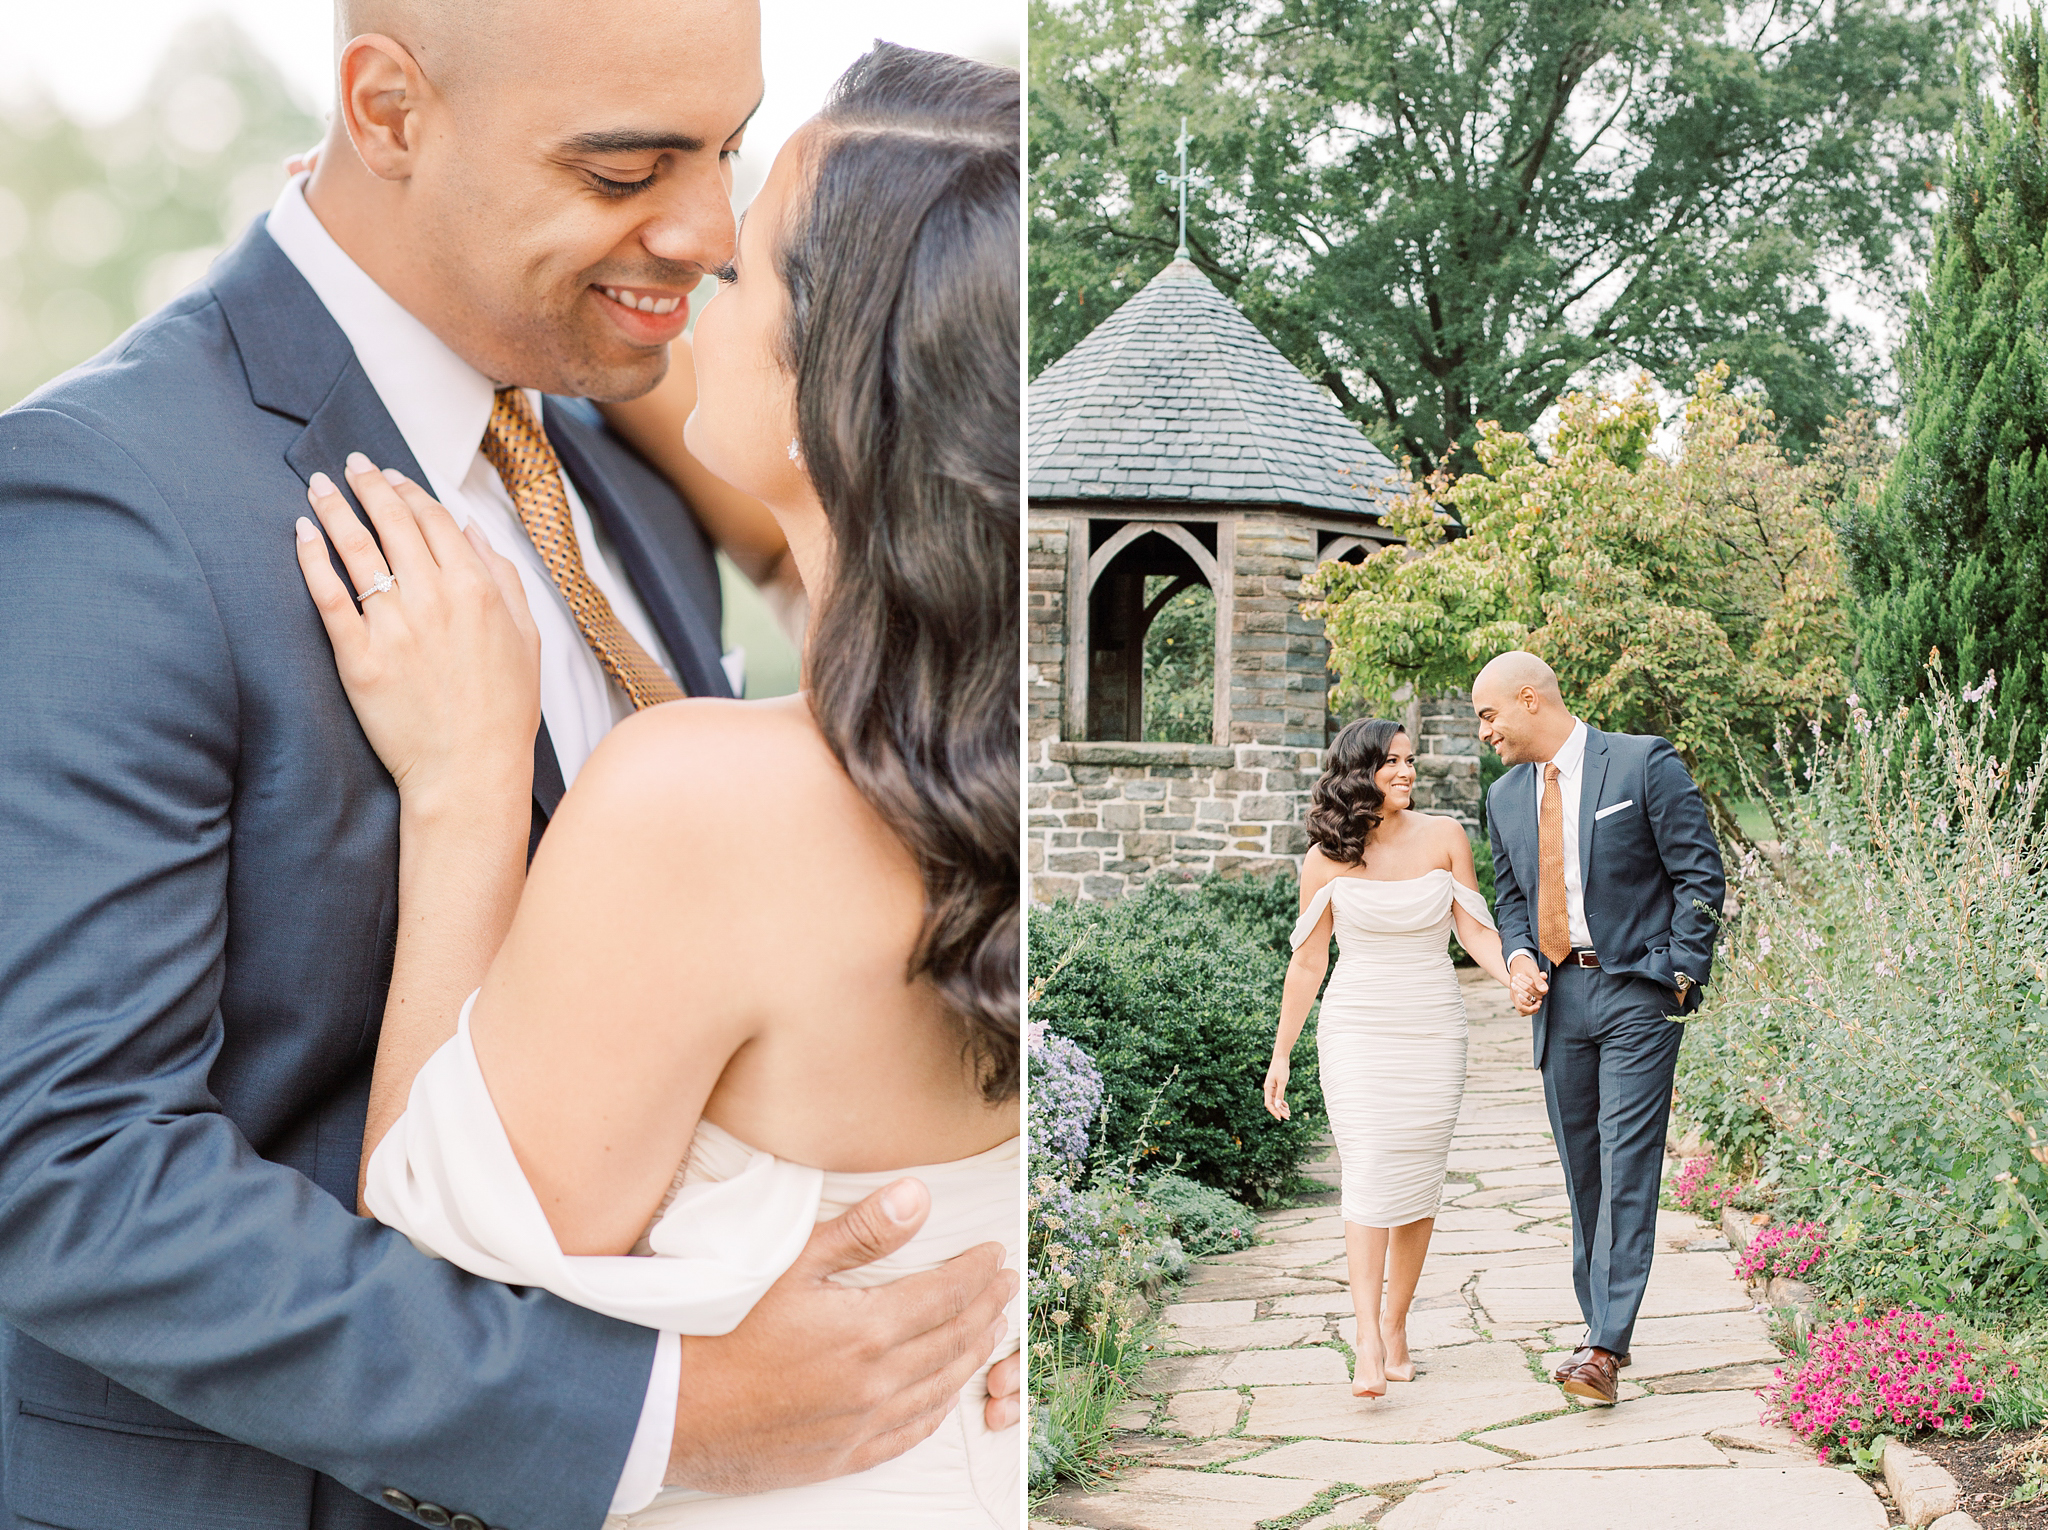 A romantic sunrise engagement session at National Cathedral in Washington, DC.